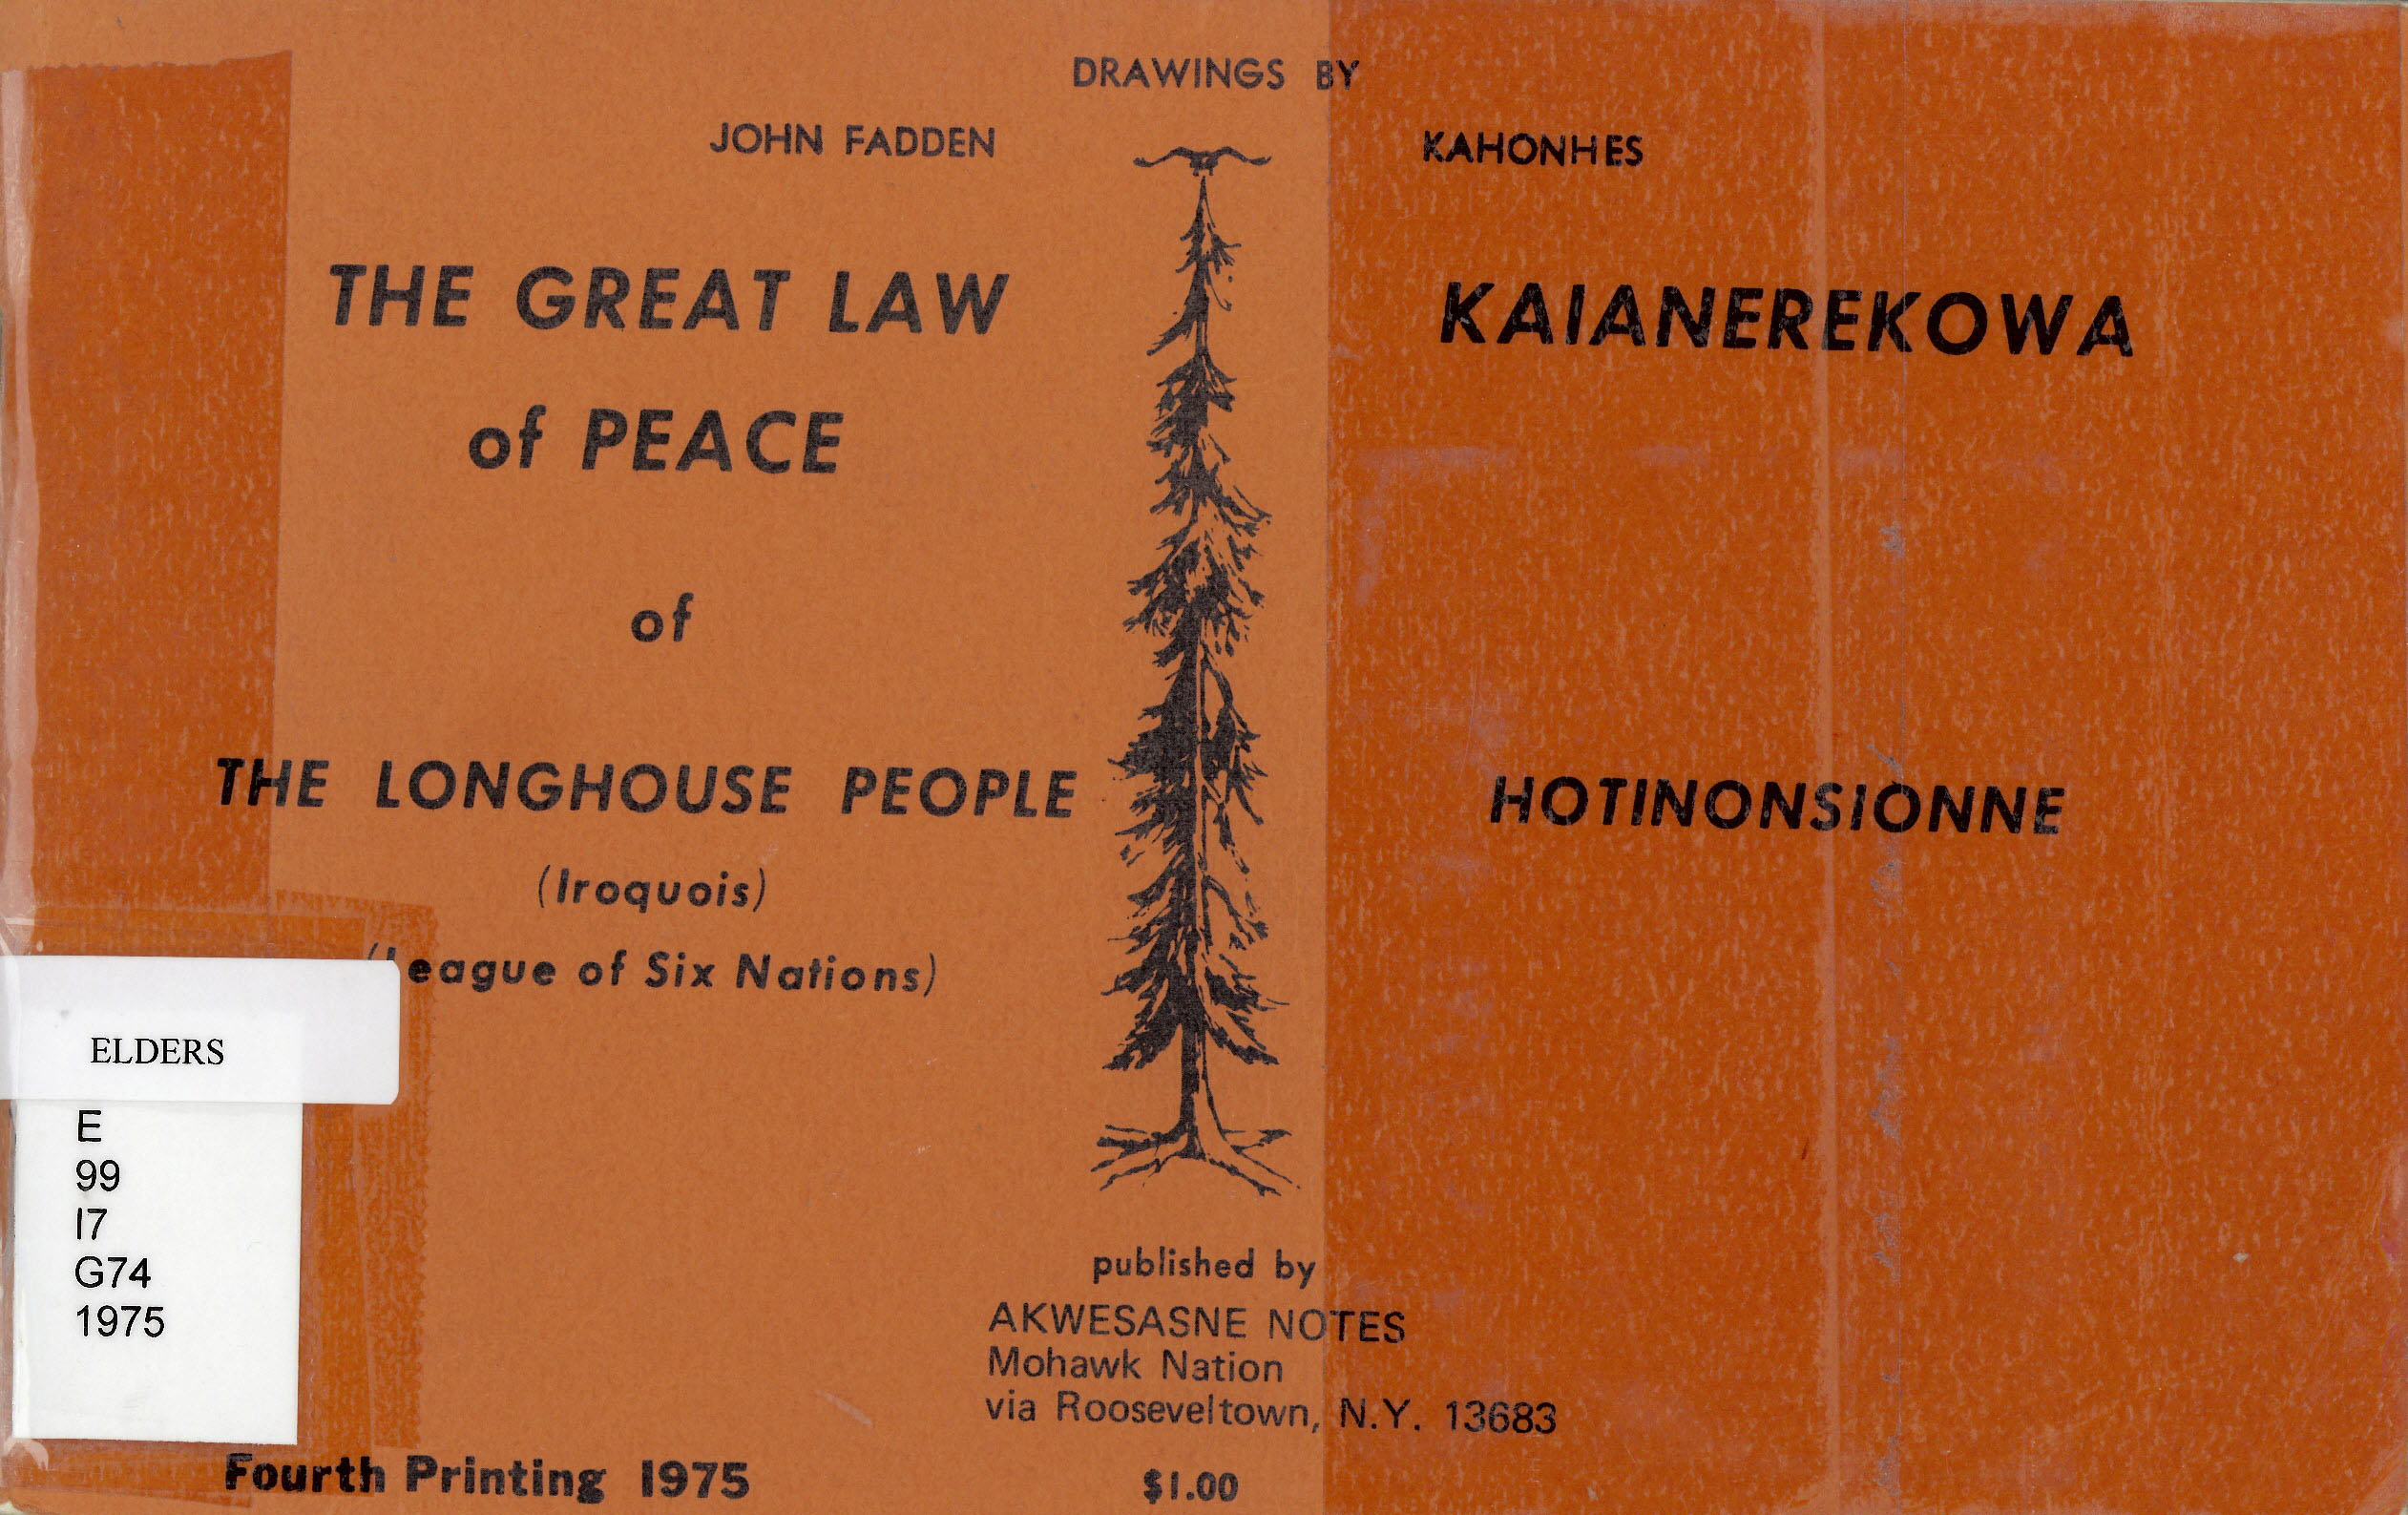 The Great law of peace of the Longhouse People (Iroquois) (League of Six Nations).